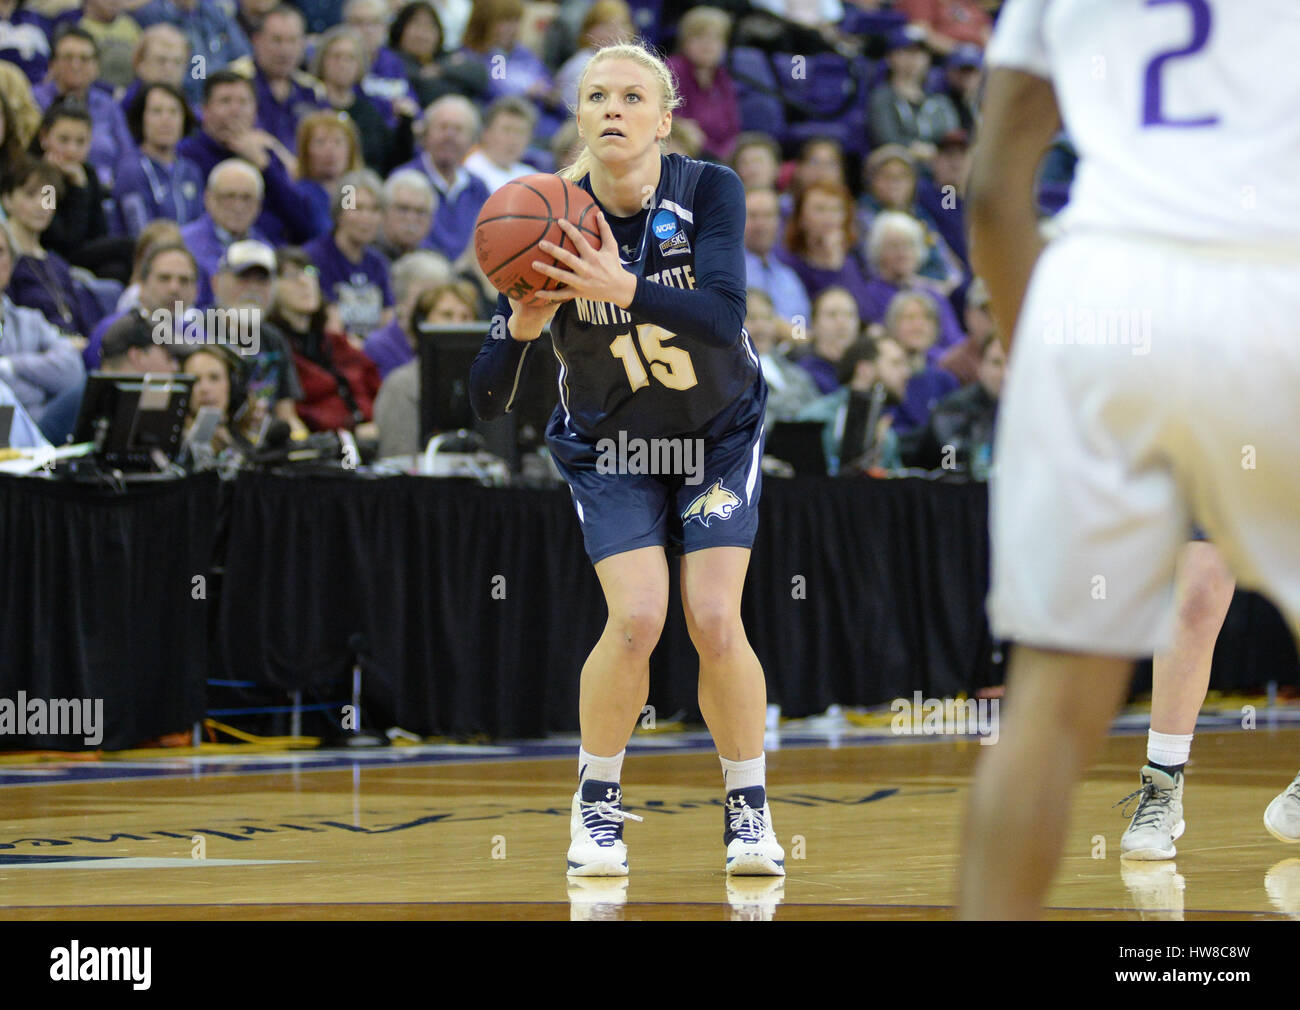 Seattle, WA, USA. 18th Mar, 2017. Montana State guard Riley Nordgaard (15) lines up a three point shot attempt during a NCAA first round women's game between the Montana State Bobcats and the Washington Huskies. The game was played at Hec Ed Pavilion on the University of Washington campus in Seattle, WA. Jeff Halstead/CSM/Alamy Live News Stock Photo